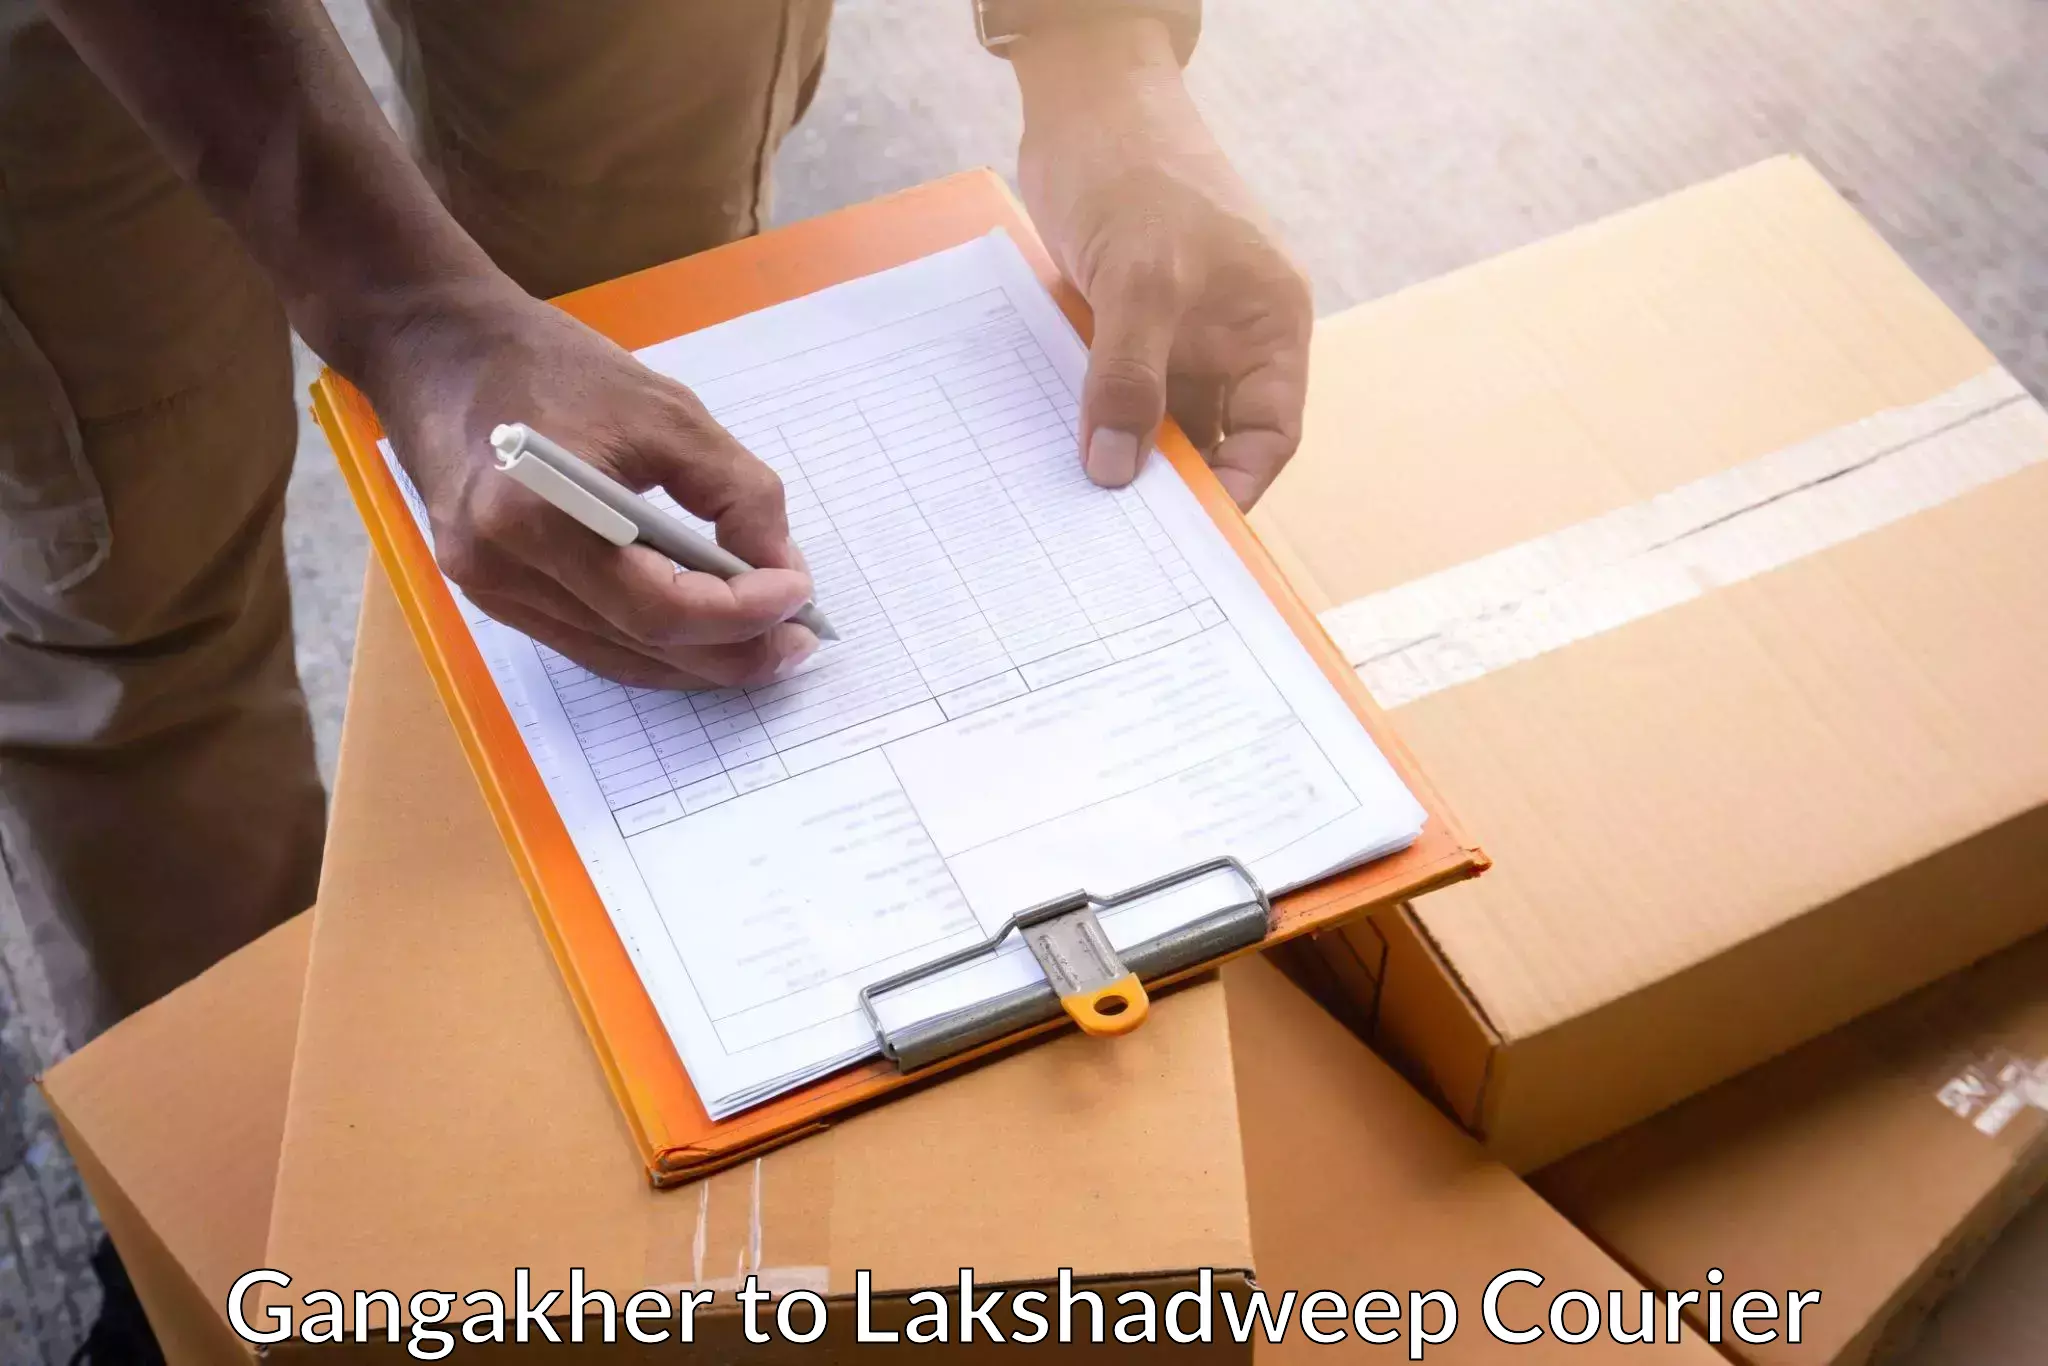 Fast shipping solutions Gangakher to Lakshadweep